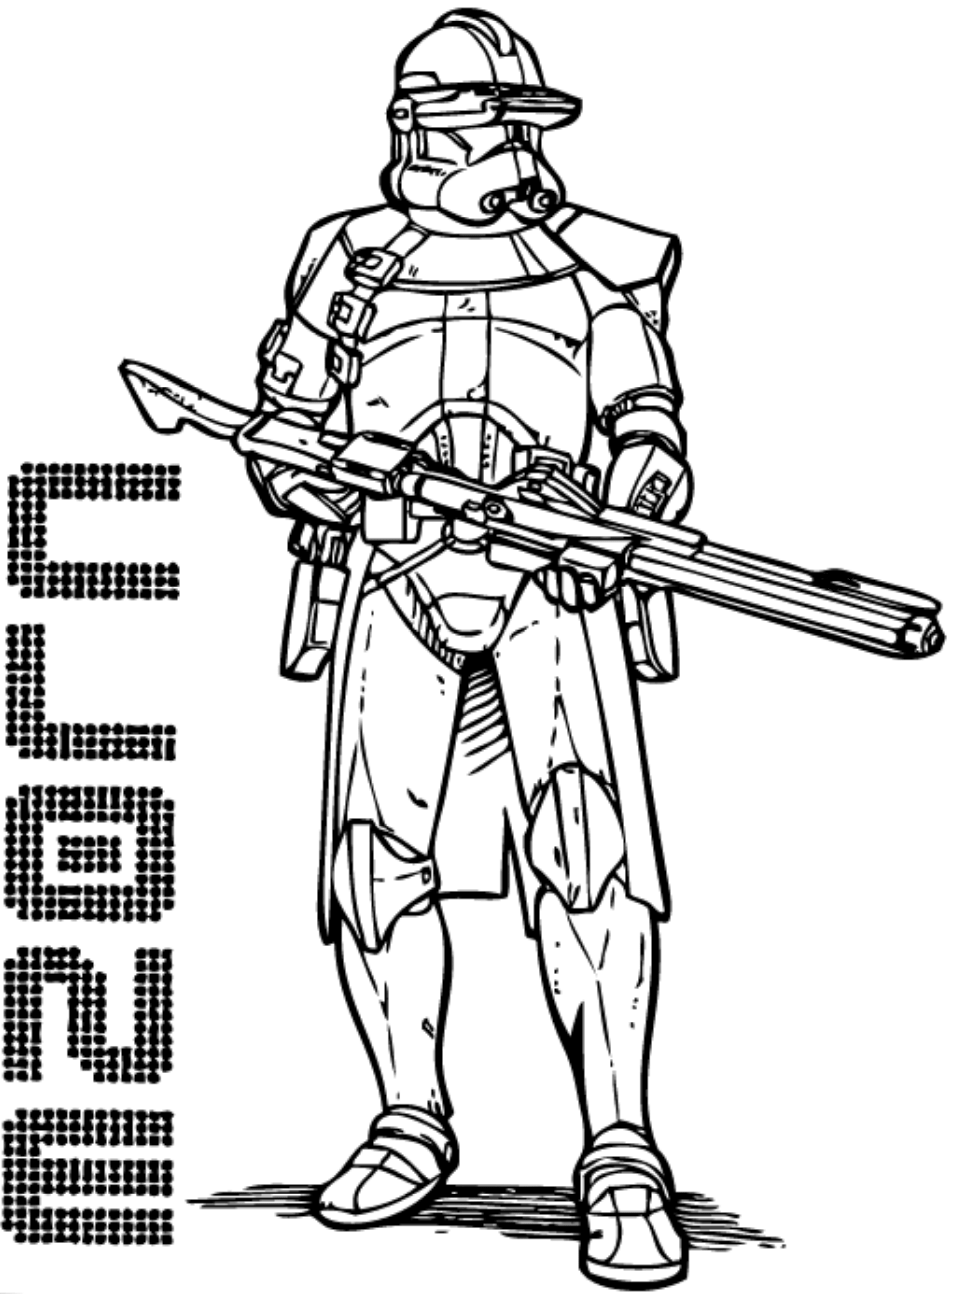 Clone Trooper Coloring Page - Free Printable Coloring Pages for Kids